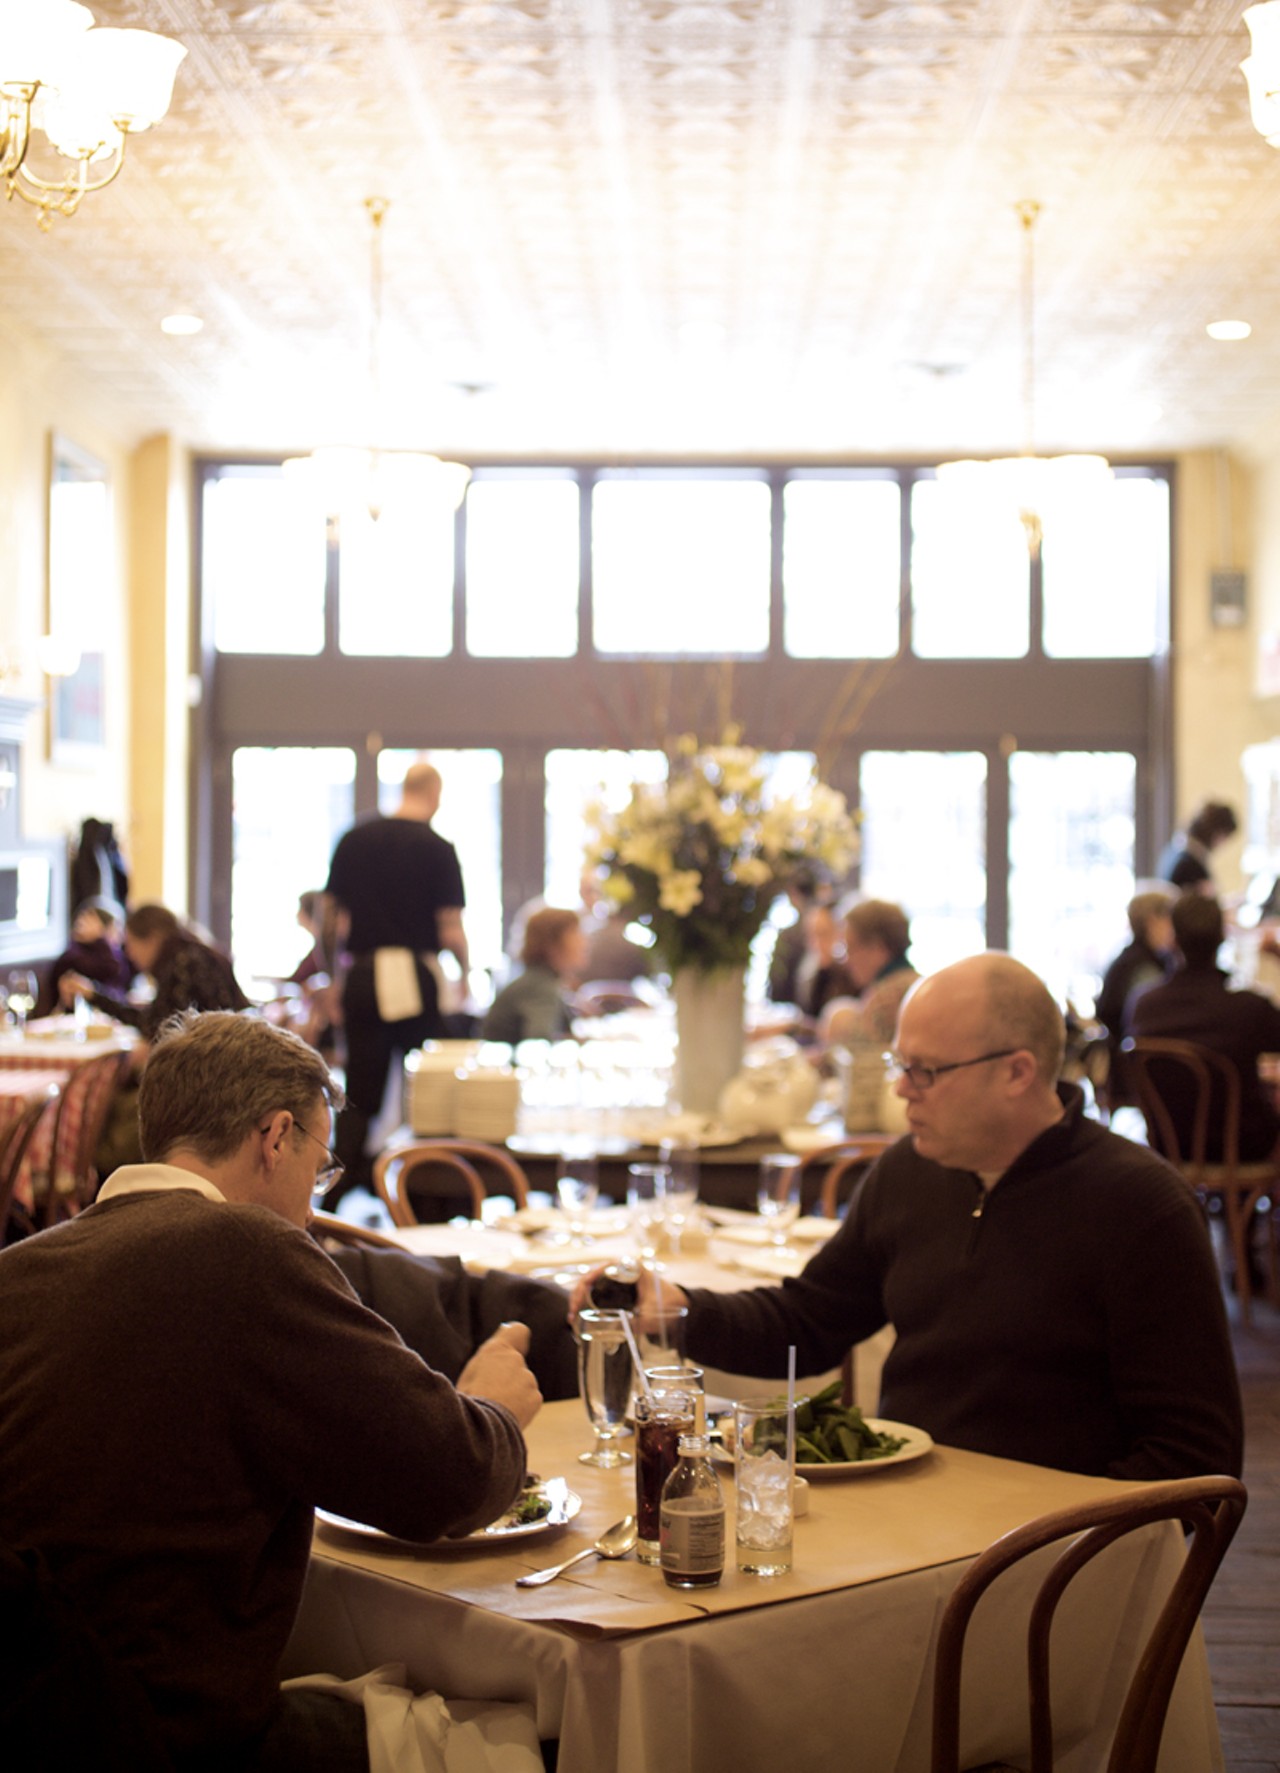 Brasserie&rsquo;s casual dining experience. Makes you want spring to come even earlier so those French doors can open to a delicate, warm breeze while sipping on a beer&hellip; Sigh.